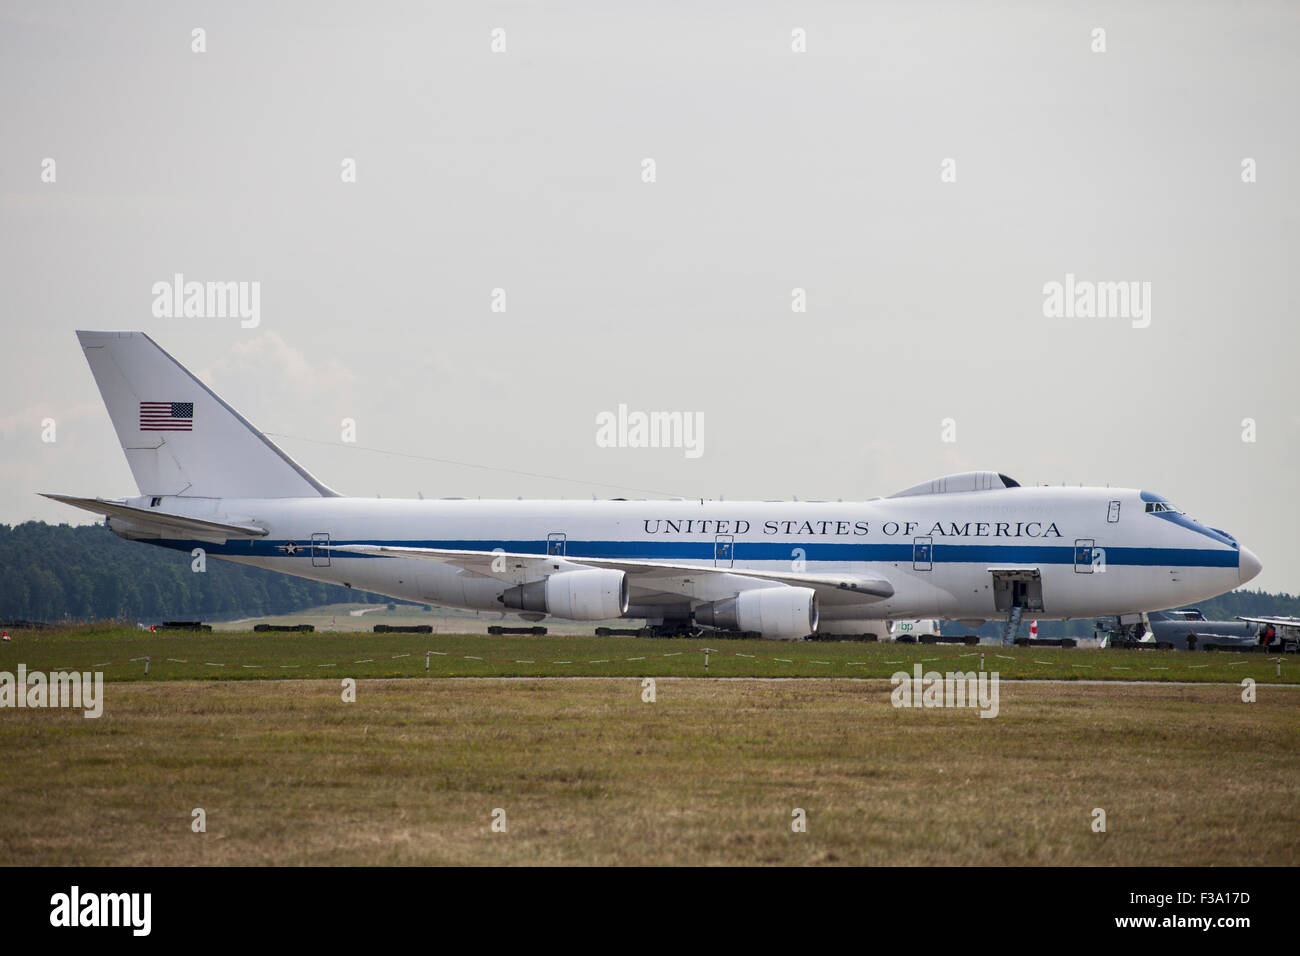 An E-4 Advanced Airborne Command Post of the U.S. Air Force at Nuremberg, Germany. Stock Photo